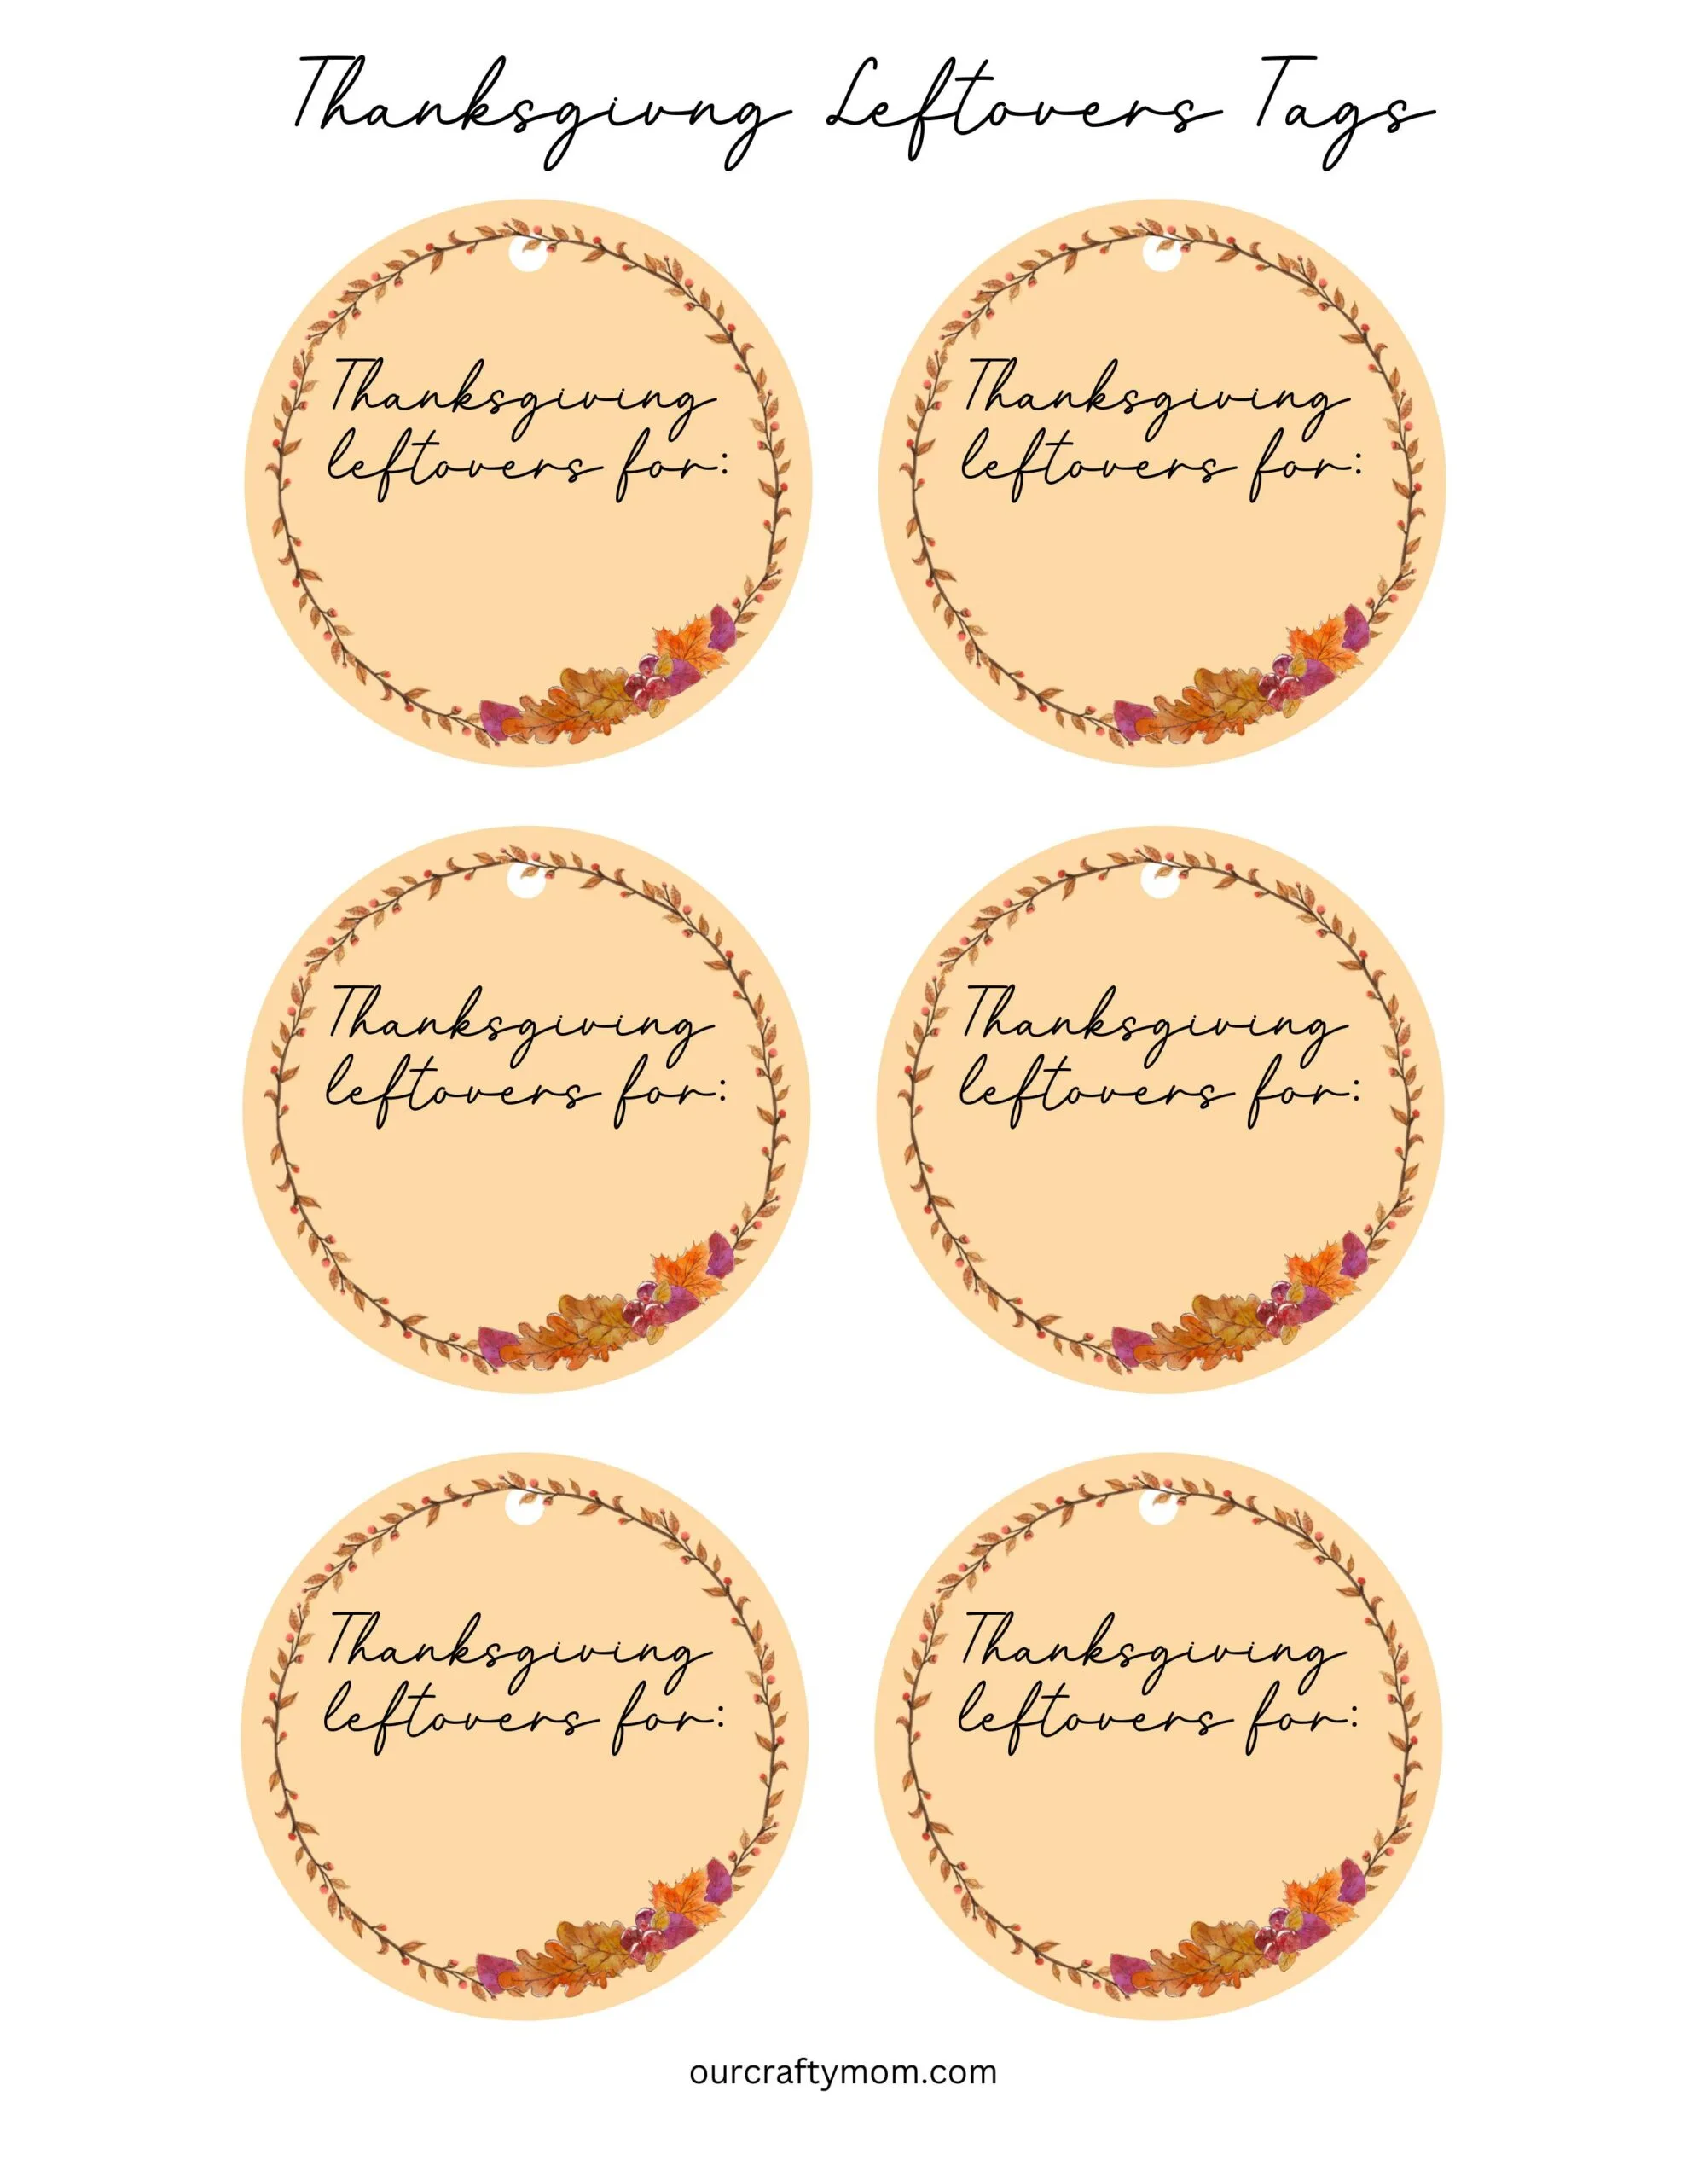 Thanksgiving leftovers tags printable